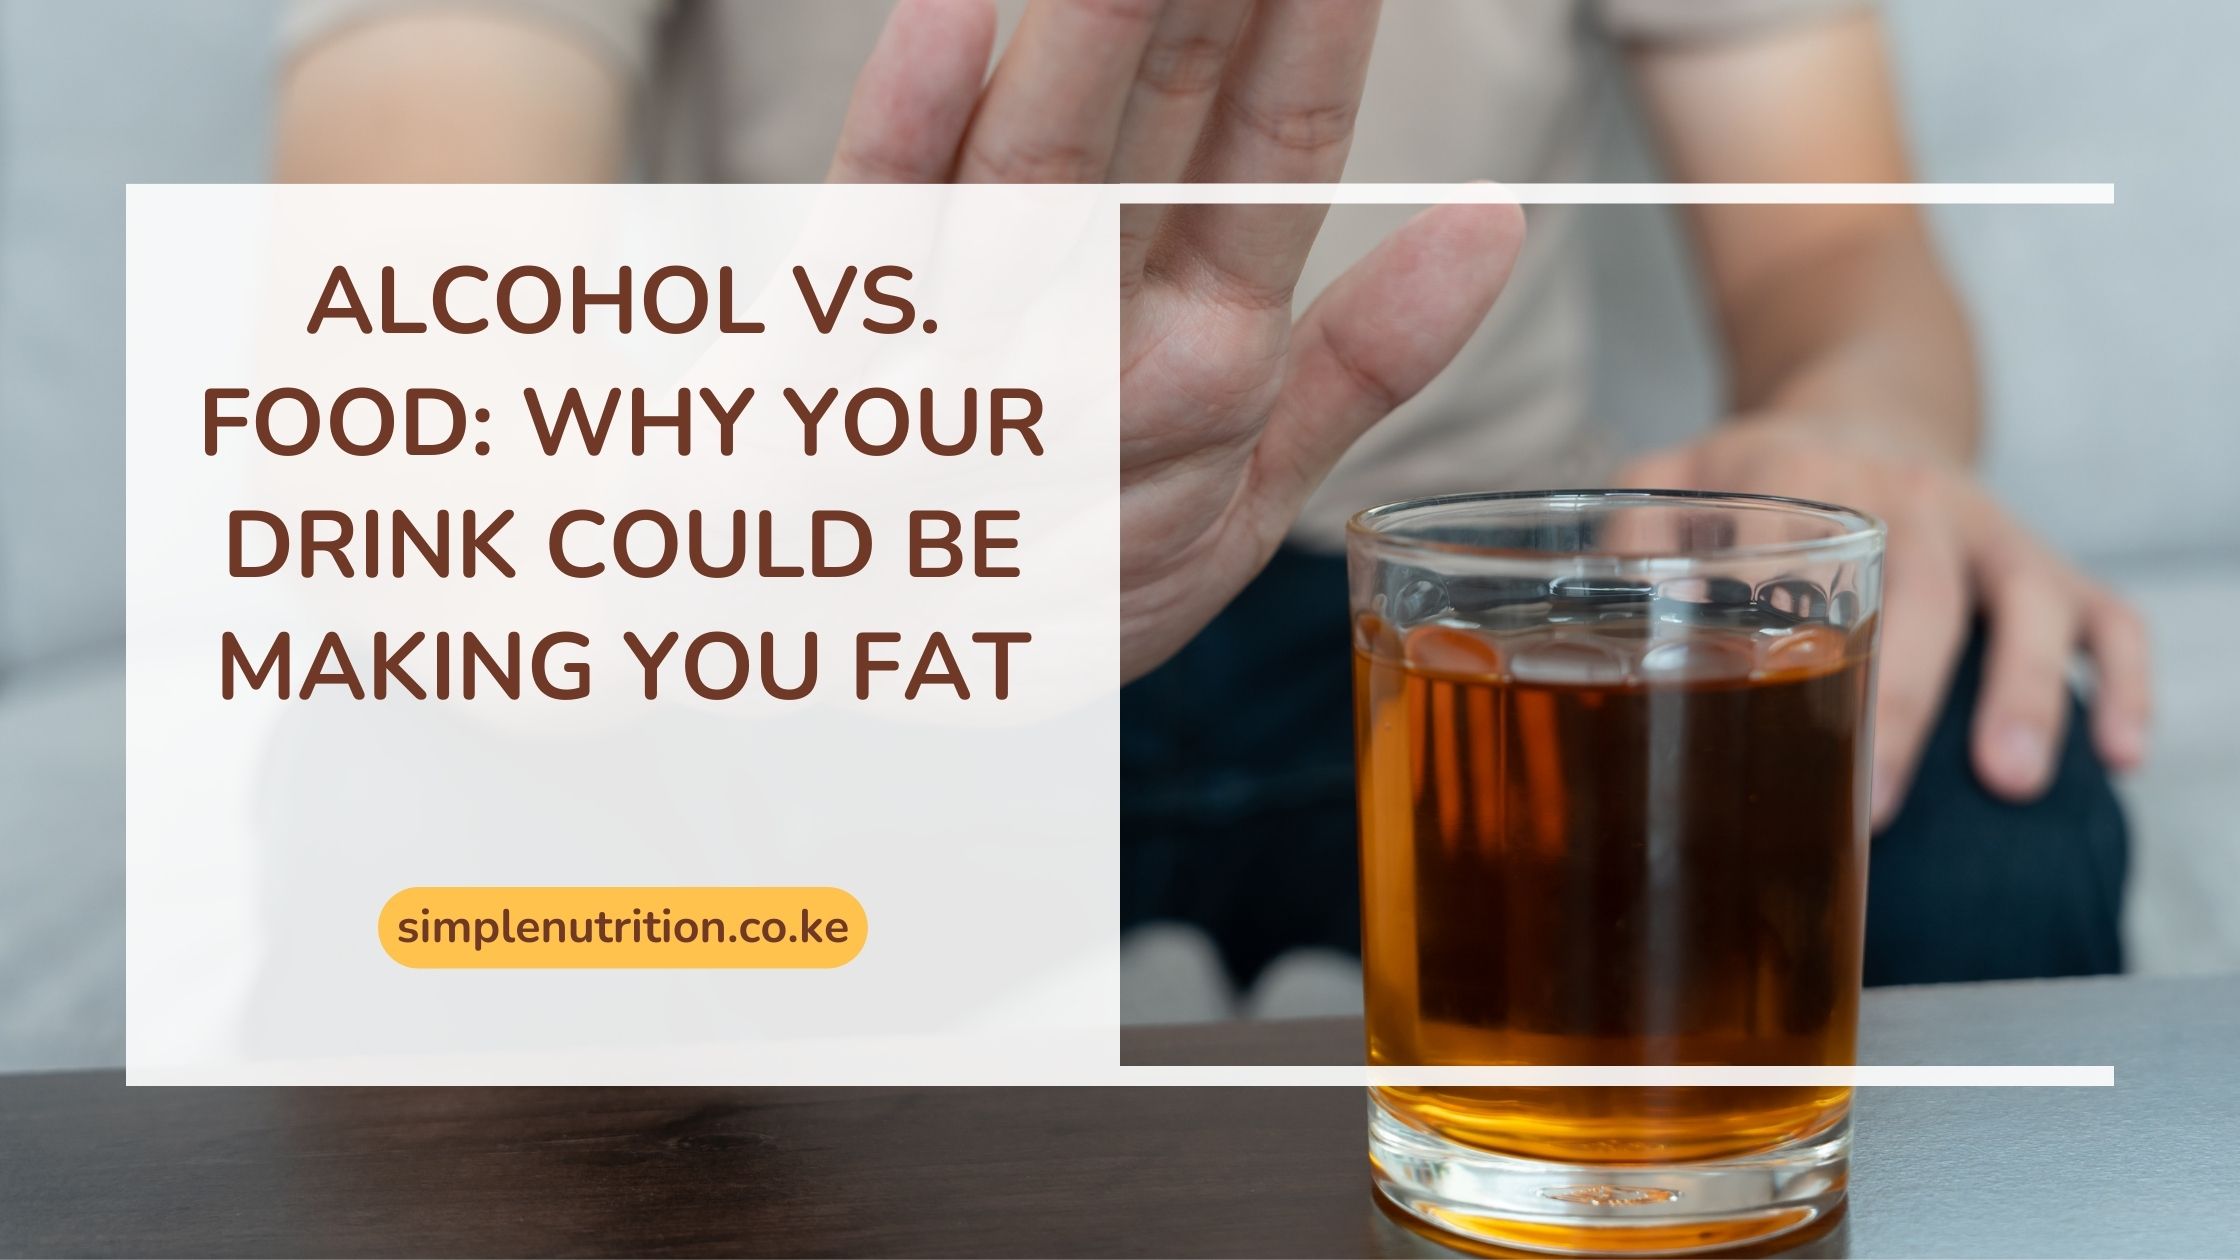 Alcohol vs. Food: Why Your Drink Could be Making You Fat